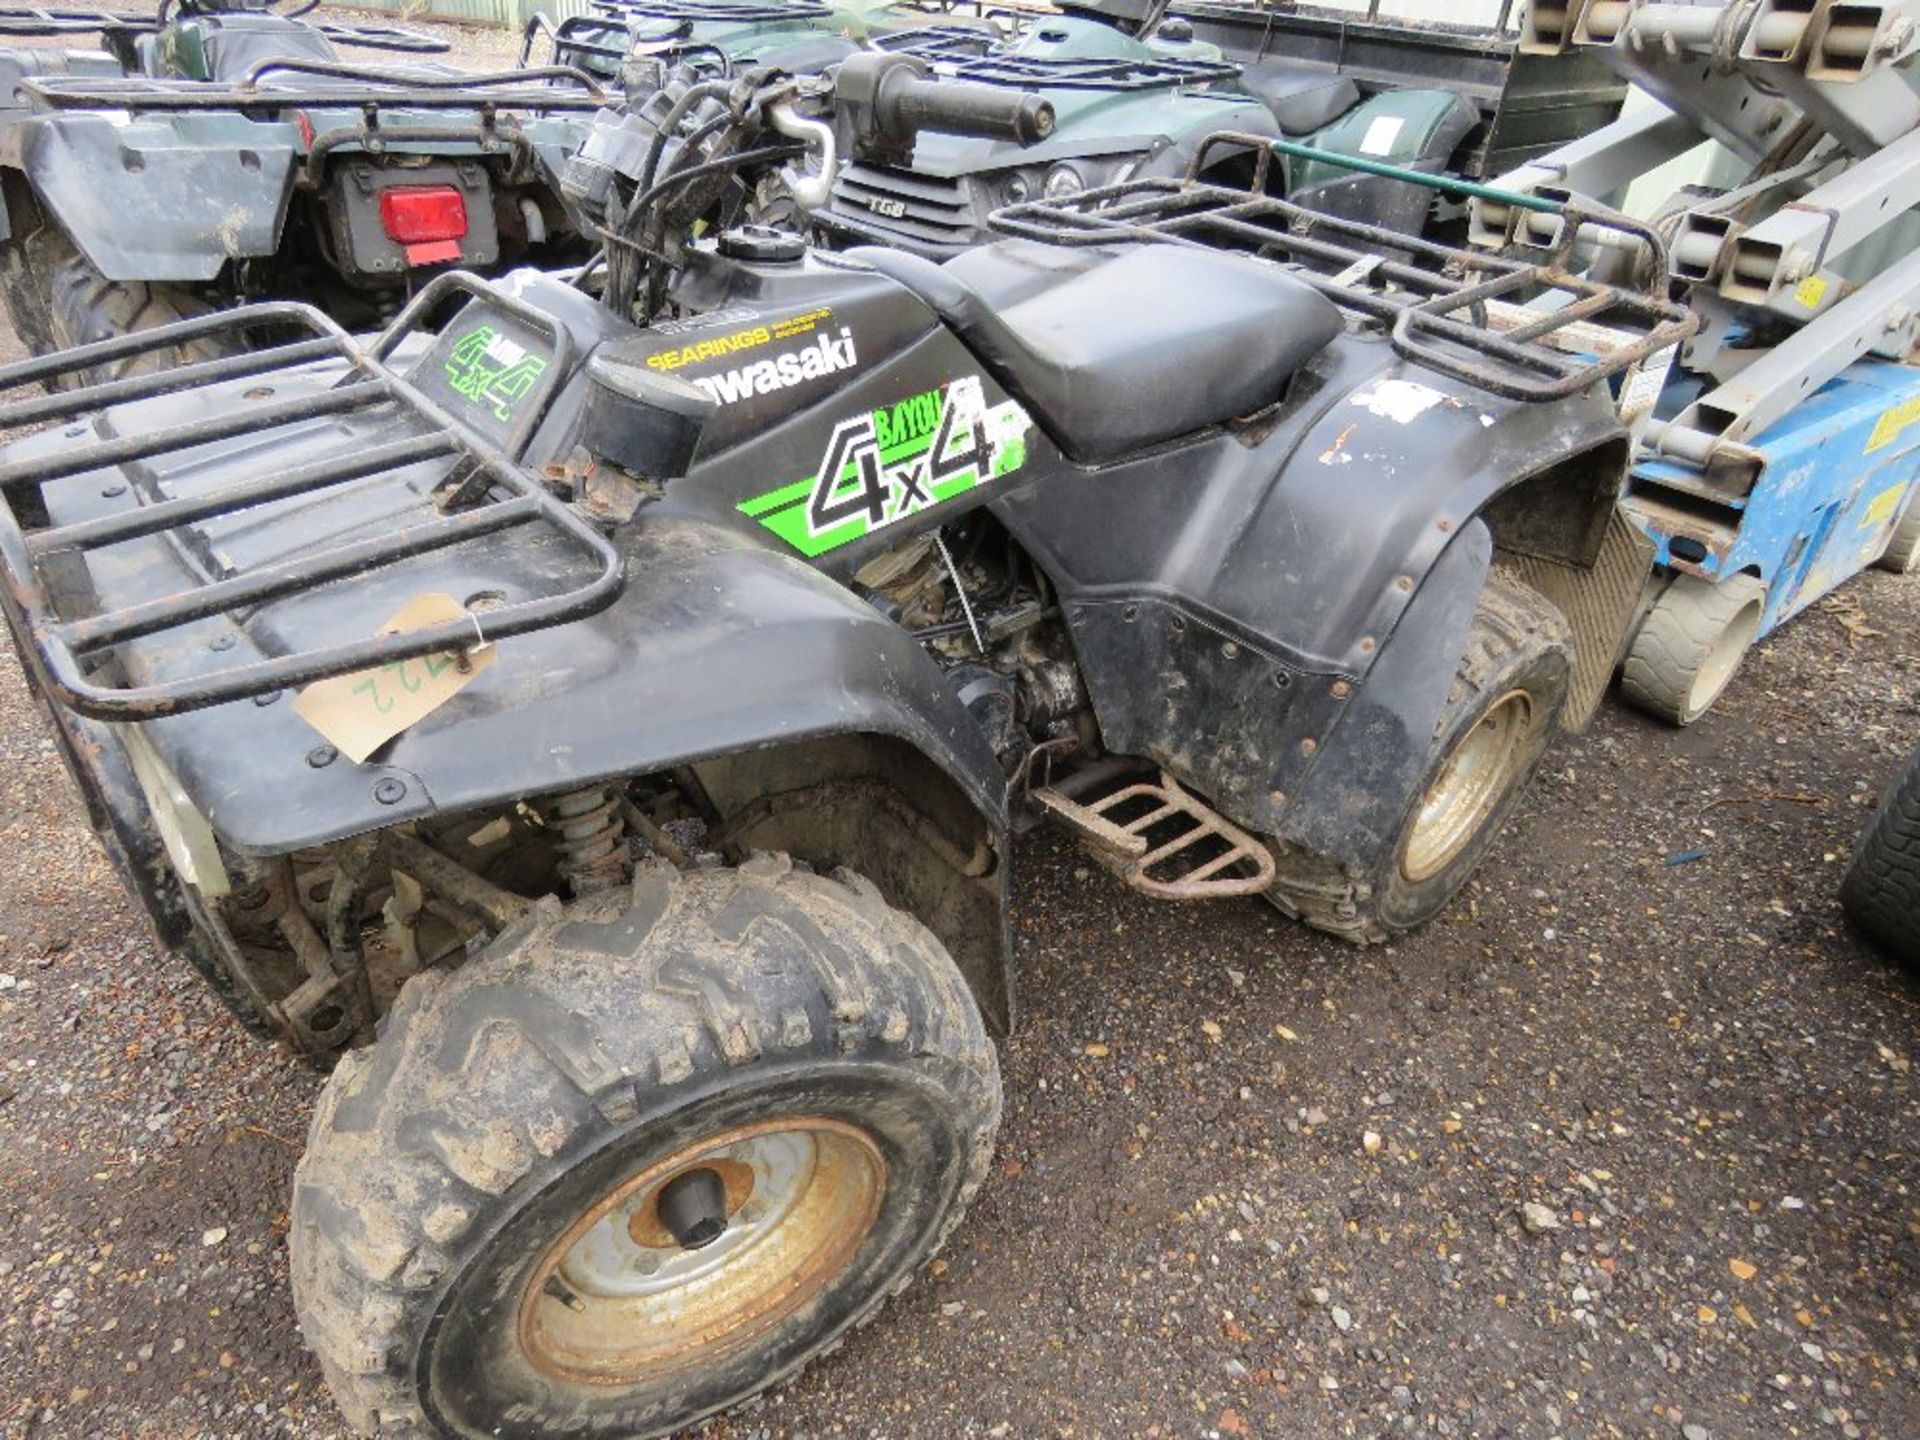 KAWASAKI BAYOU 4WD QUAD BIKE 5174REC MILES, . WHEN TESTED WAS SEEN TO DRIVE, STEER AND BRAKE, STA - Image 3 of 6